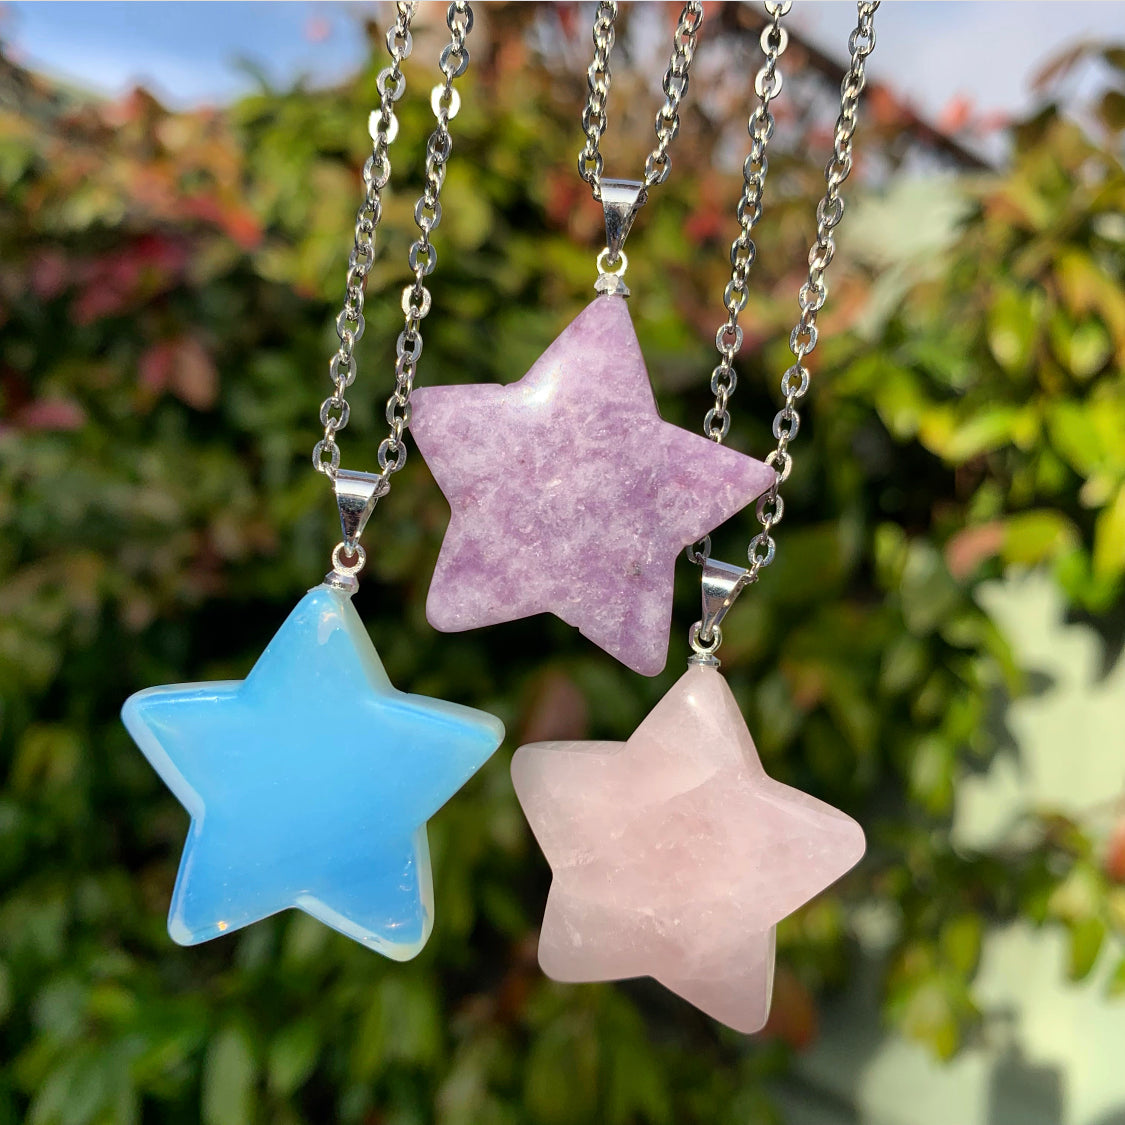 Crystal Star Necklace Pendant